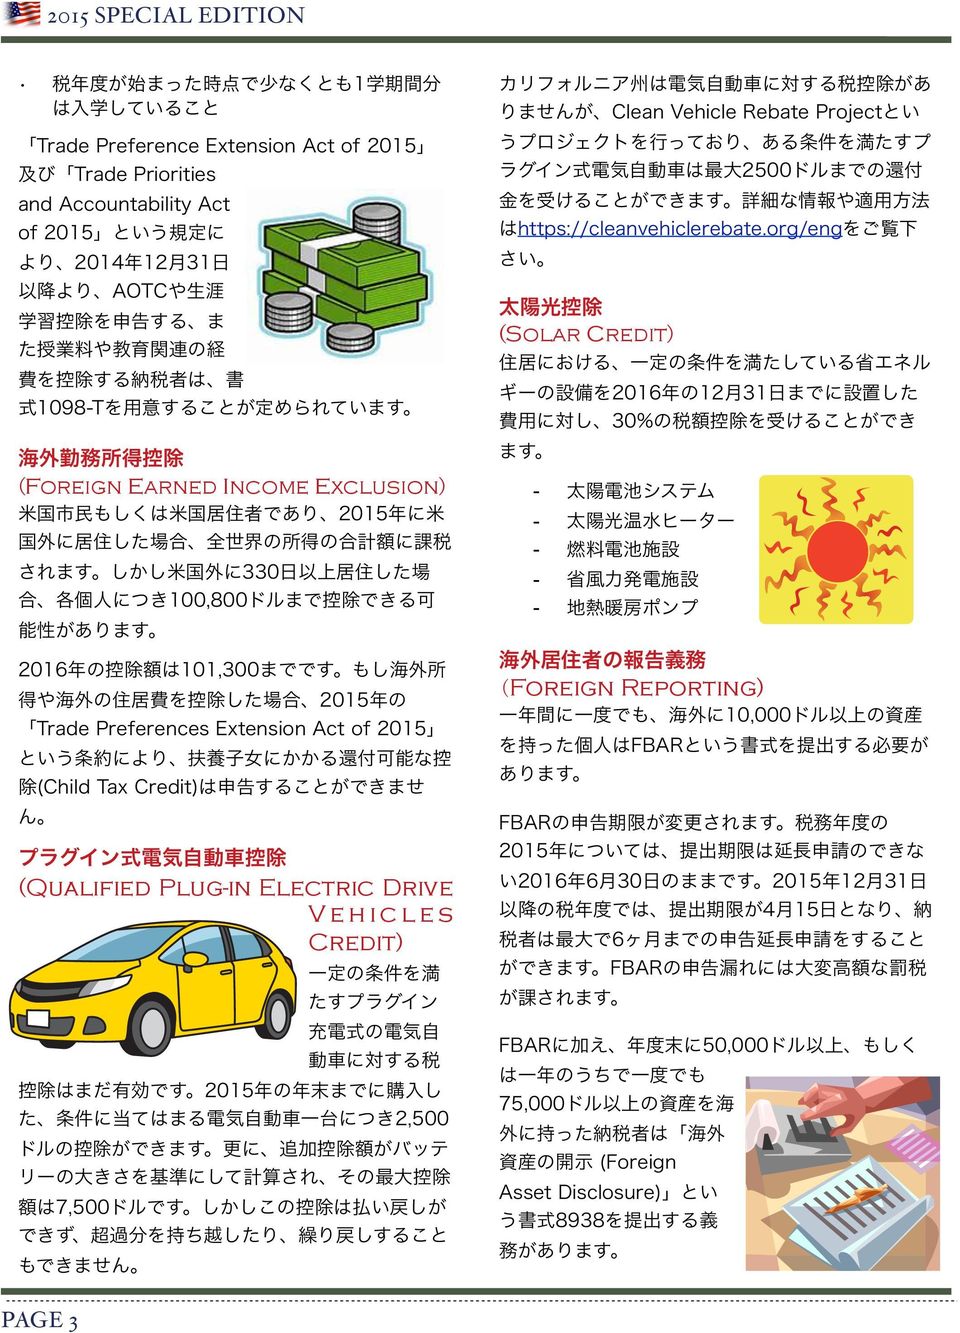 Electric Drive Vehicles Credit) PAGE 3